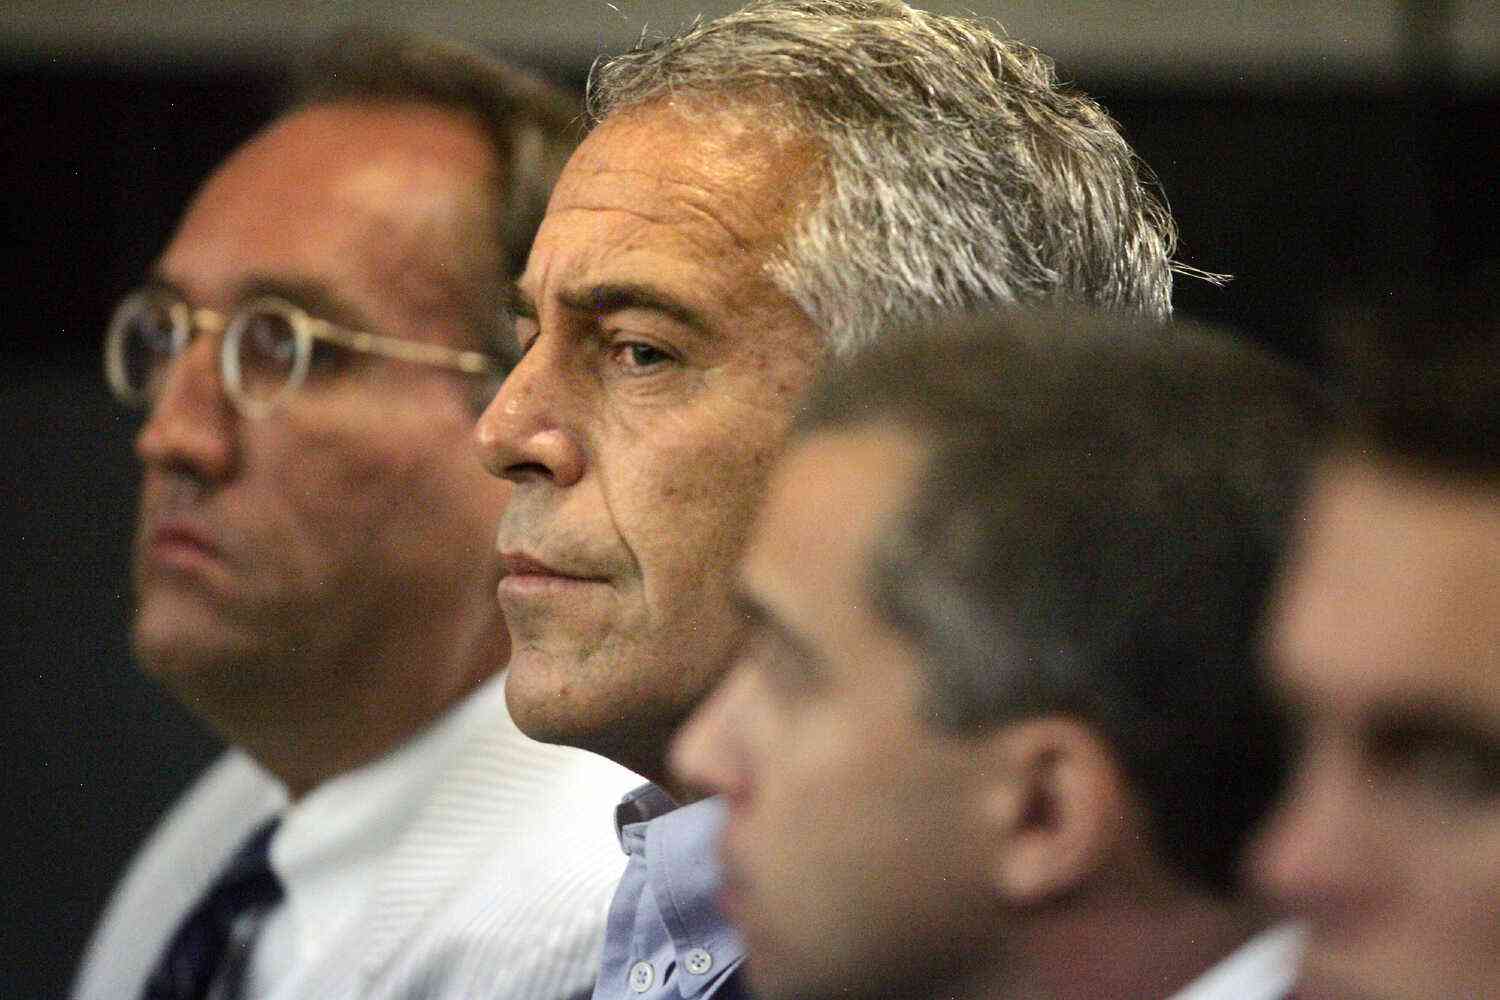 Malfeasance and slander: How Jeffrey Epstein got away with the rapes and child abuse he committed